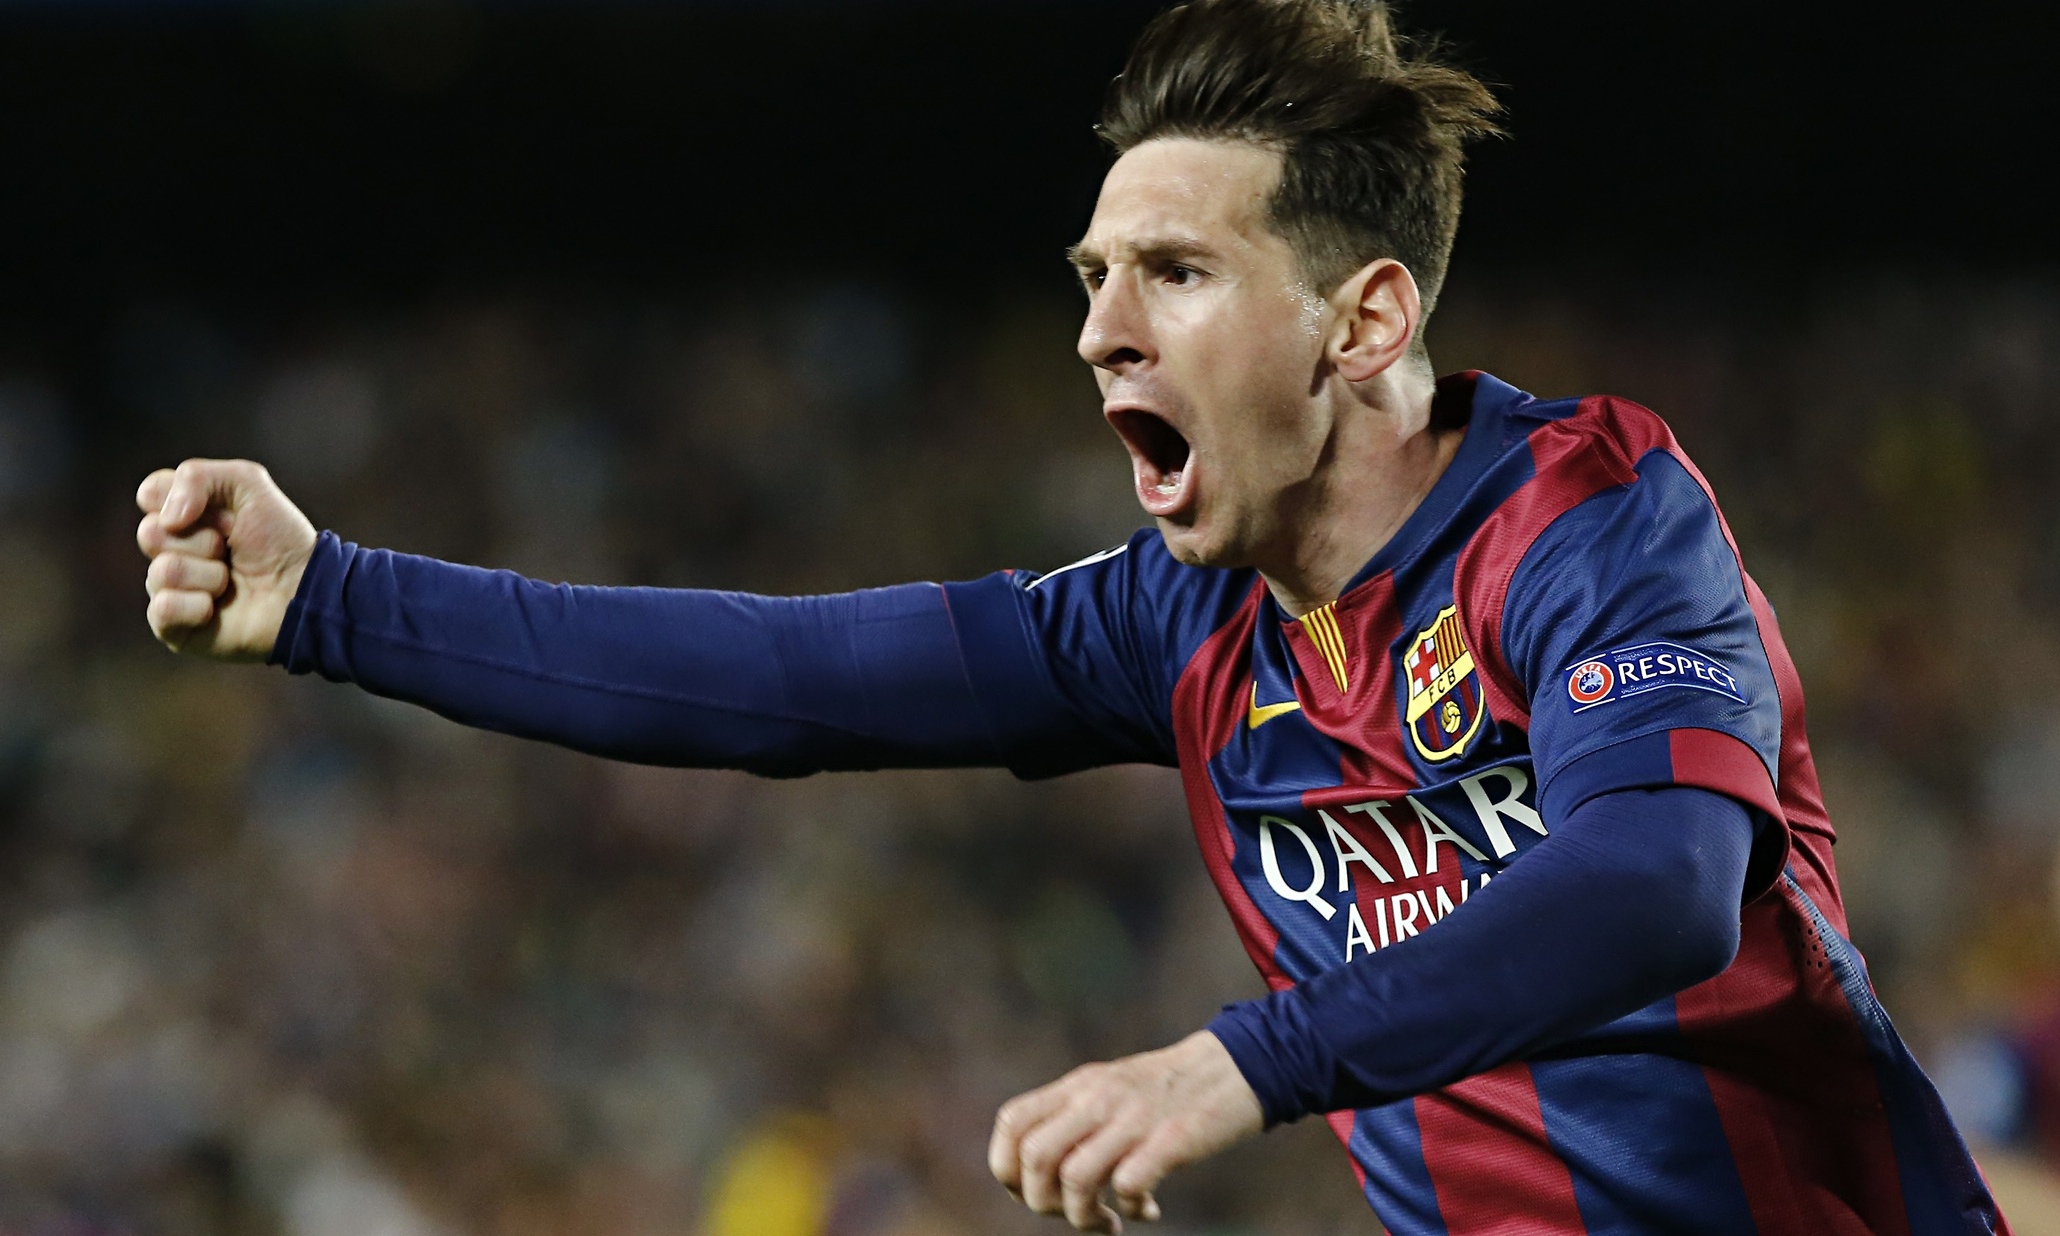 messi wallpaper 2015,football player,soccer player,player,ball game,sports